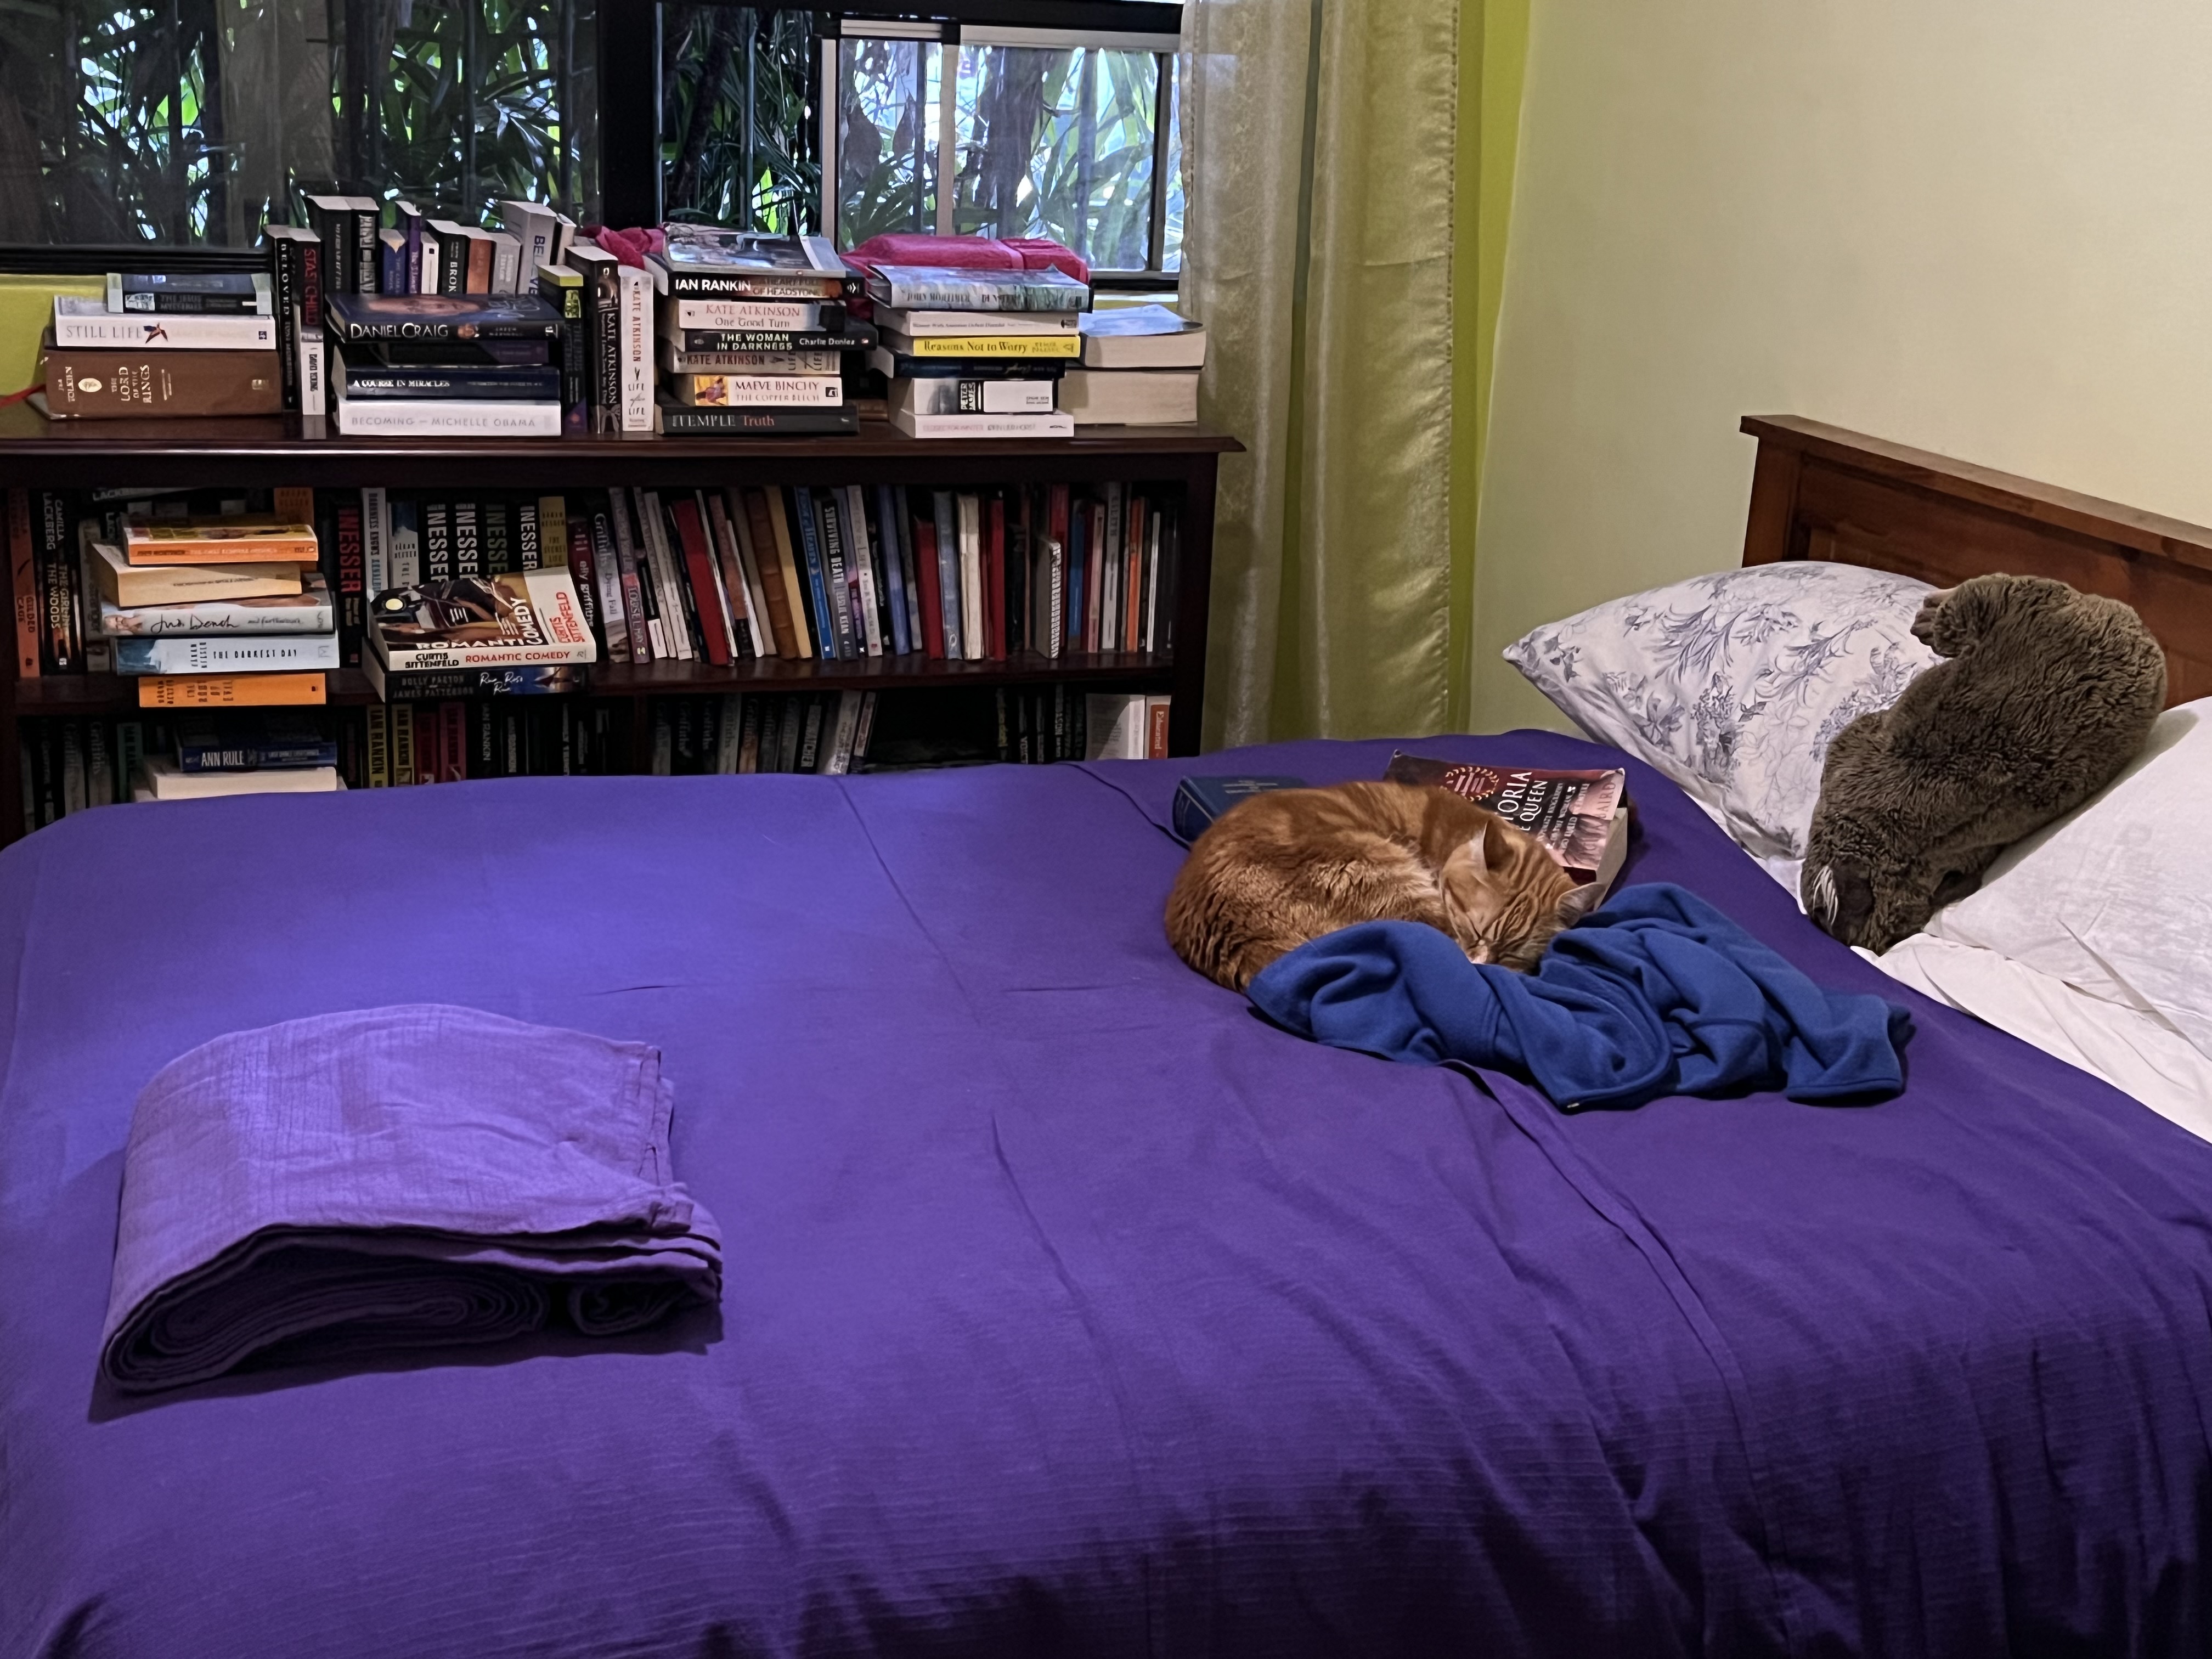 A ginger cat sleeps on a purple bed.